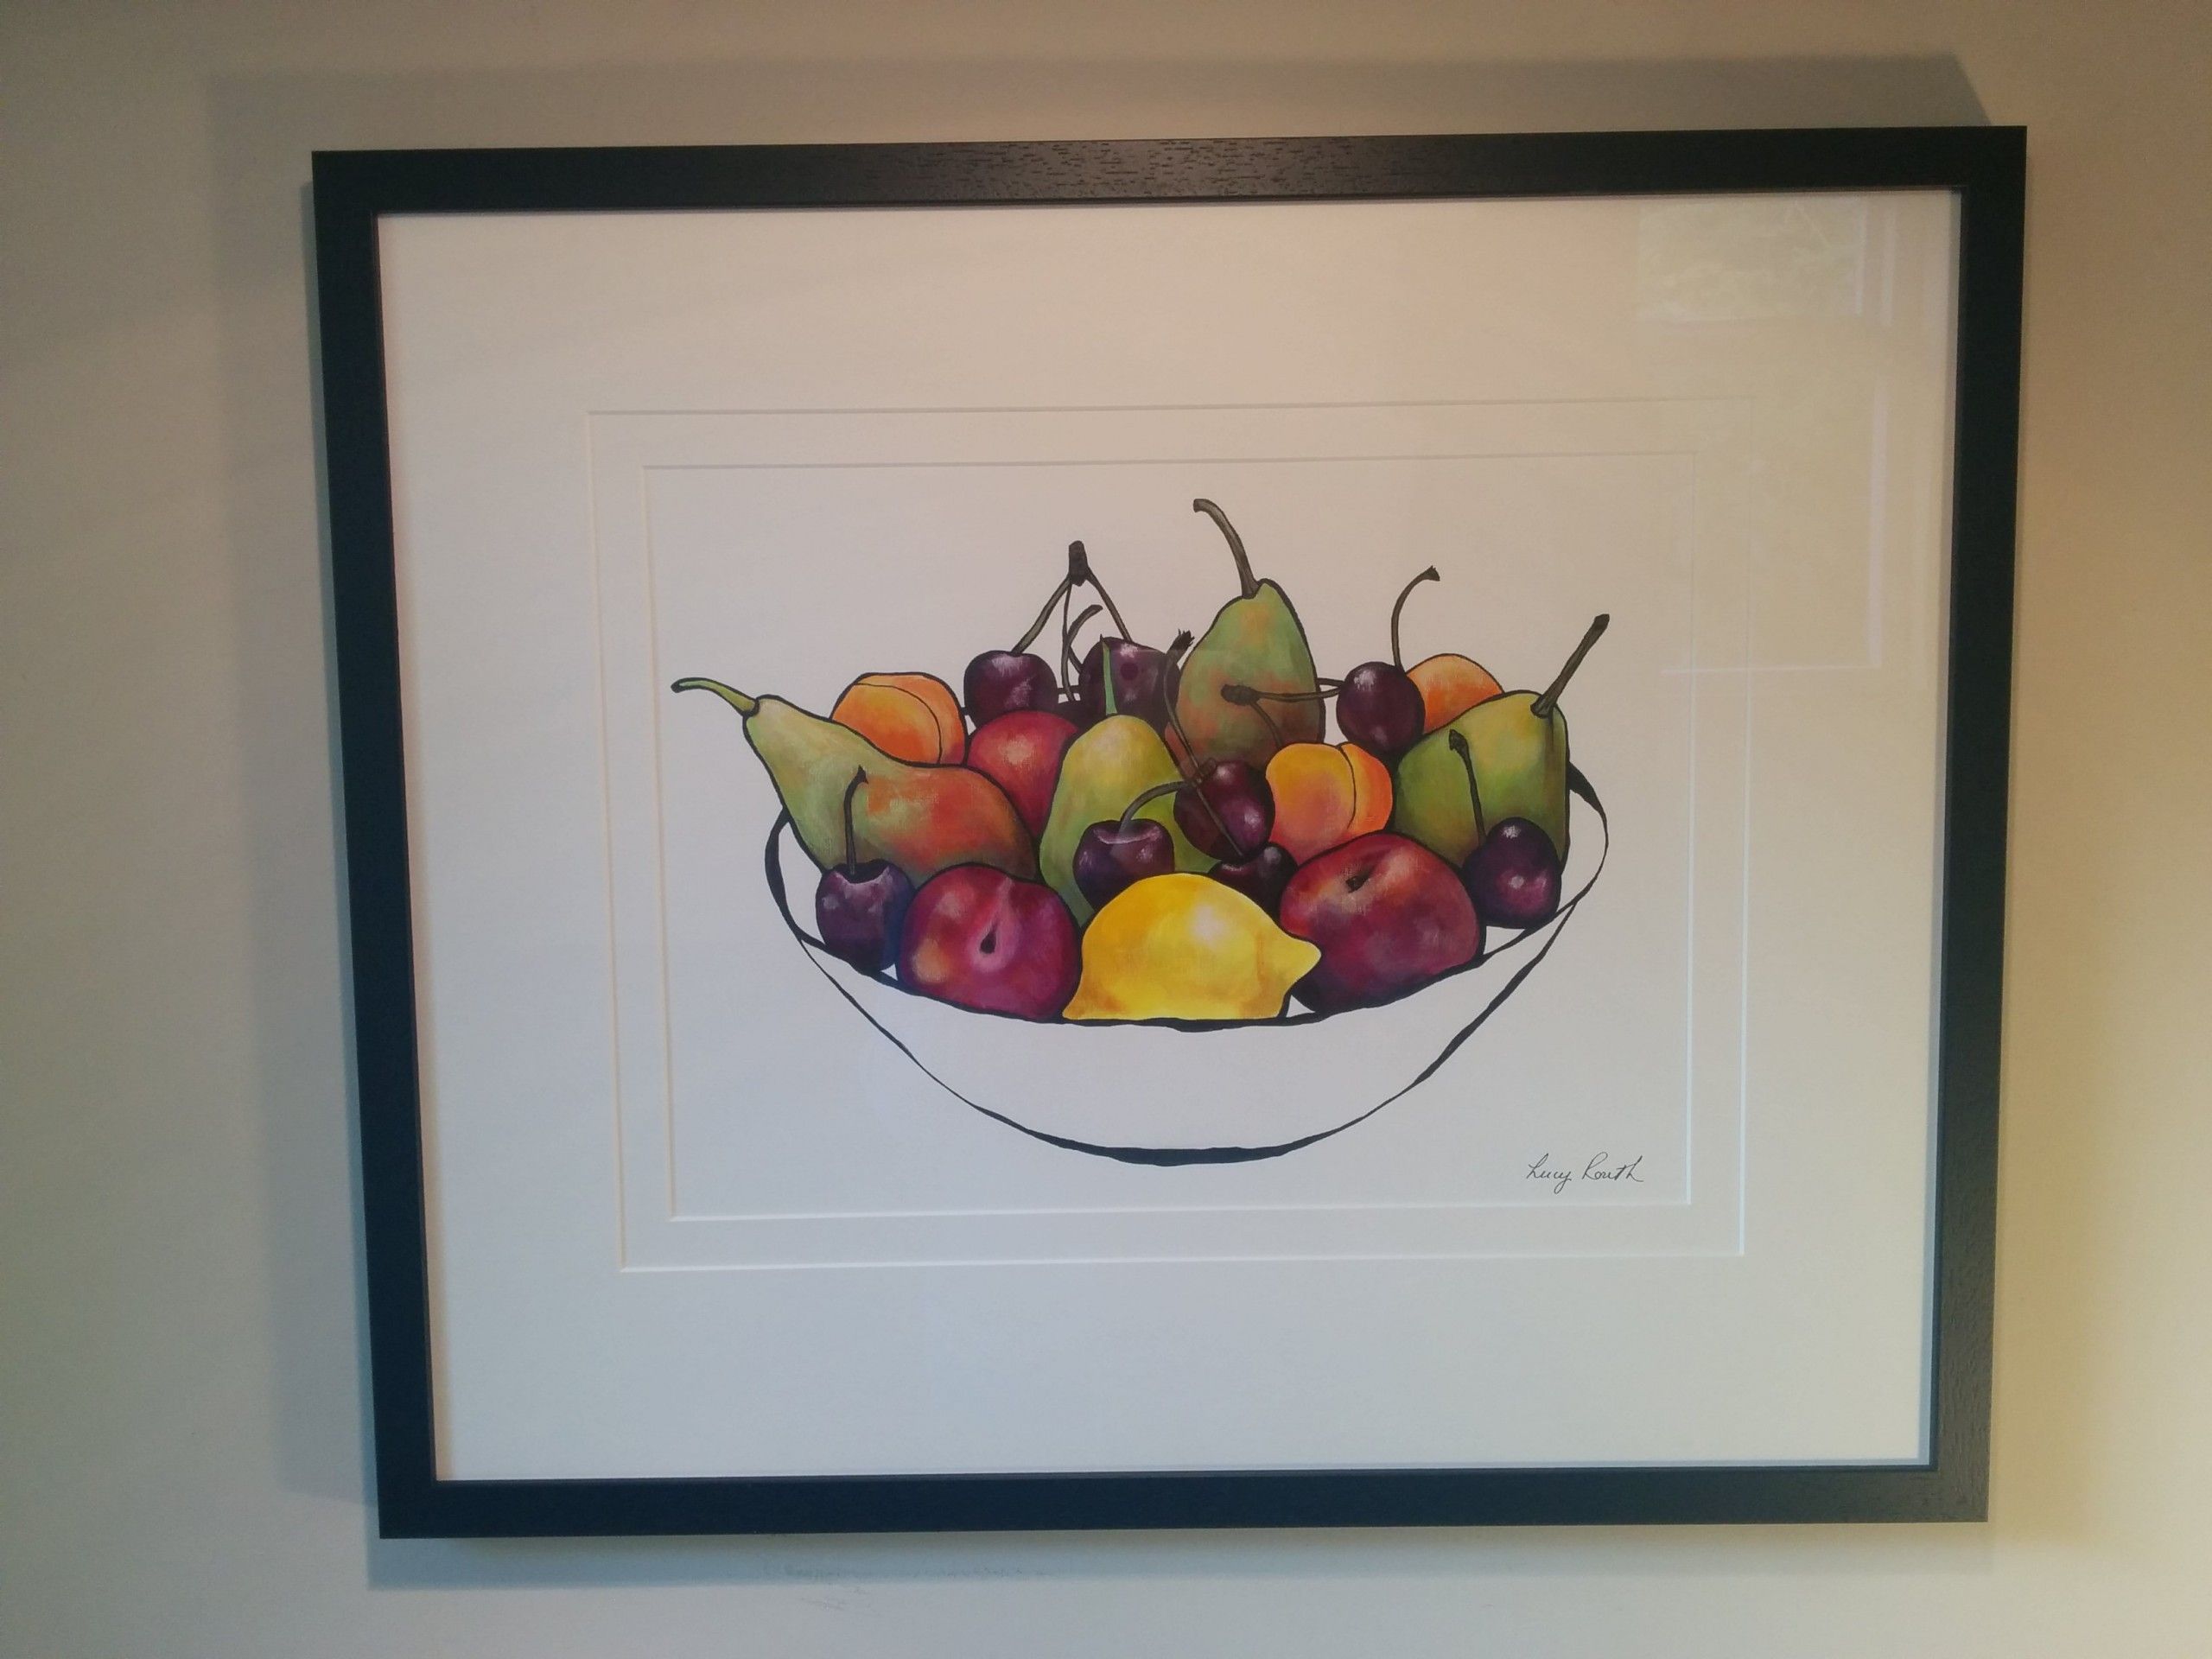 Fruit bowl with cherries by Lucy Routh